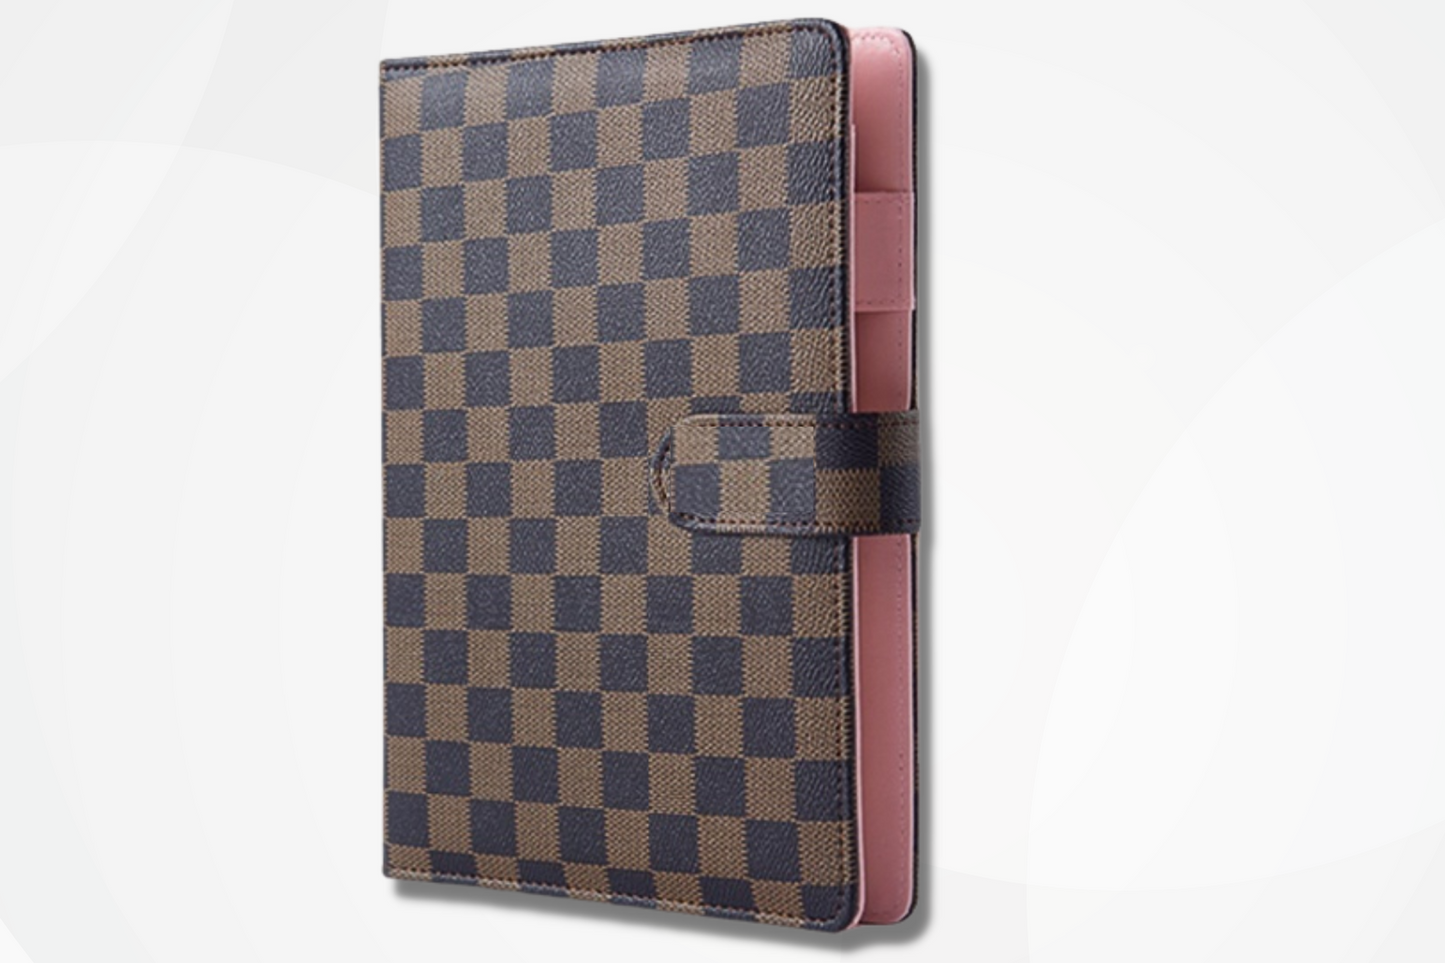 PU Leather A7 Budget Binder Planner Binder for Budgeting for Money Saving